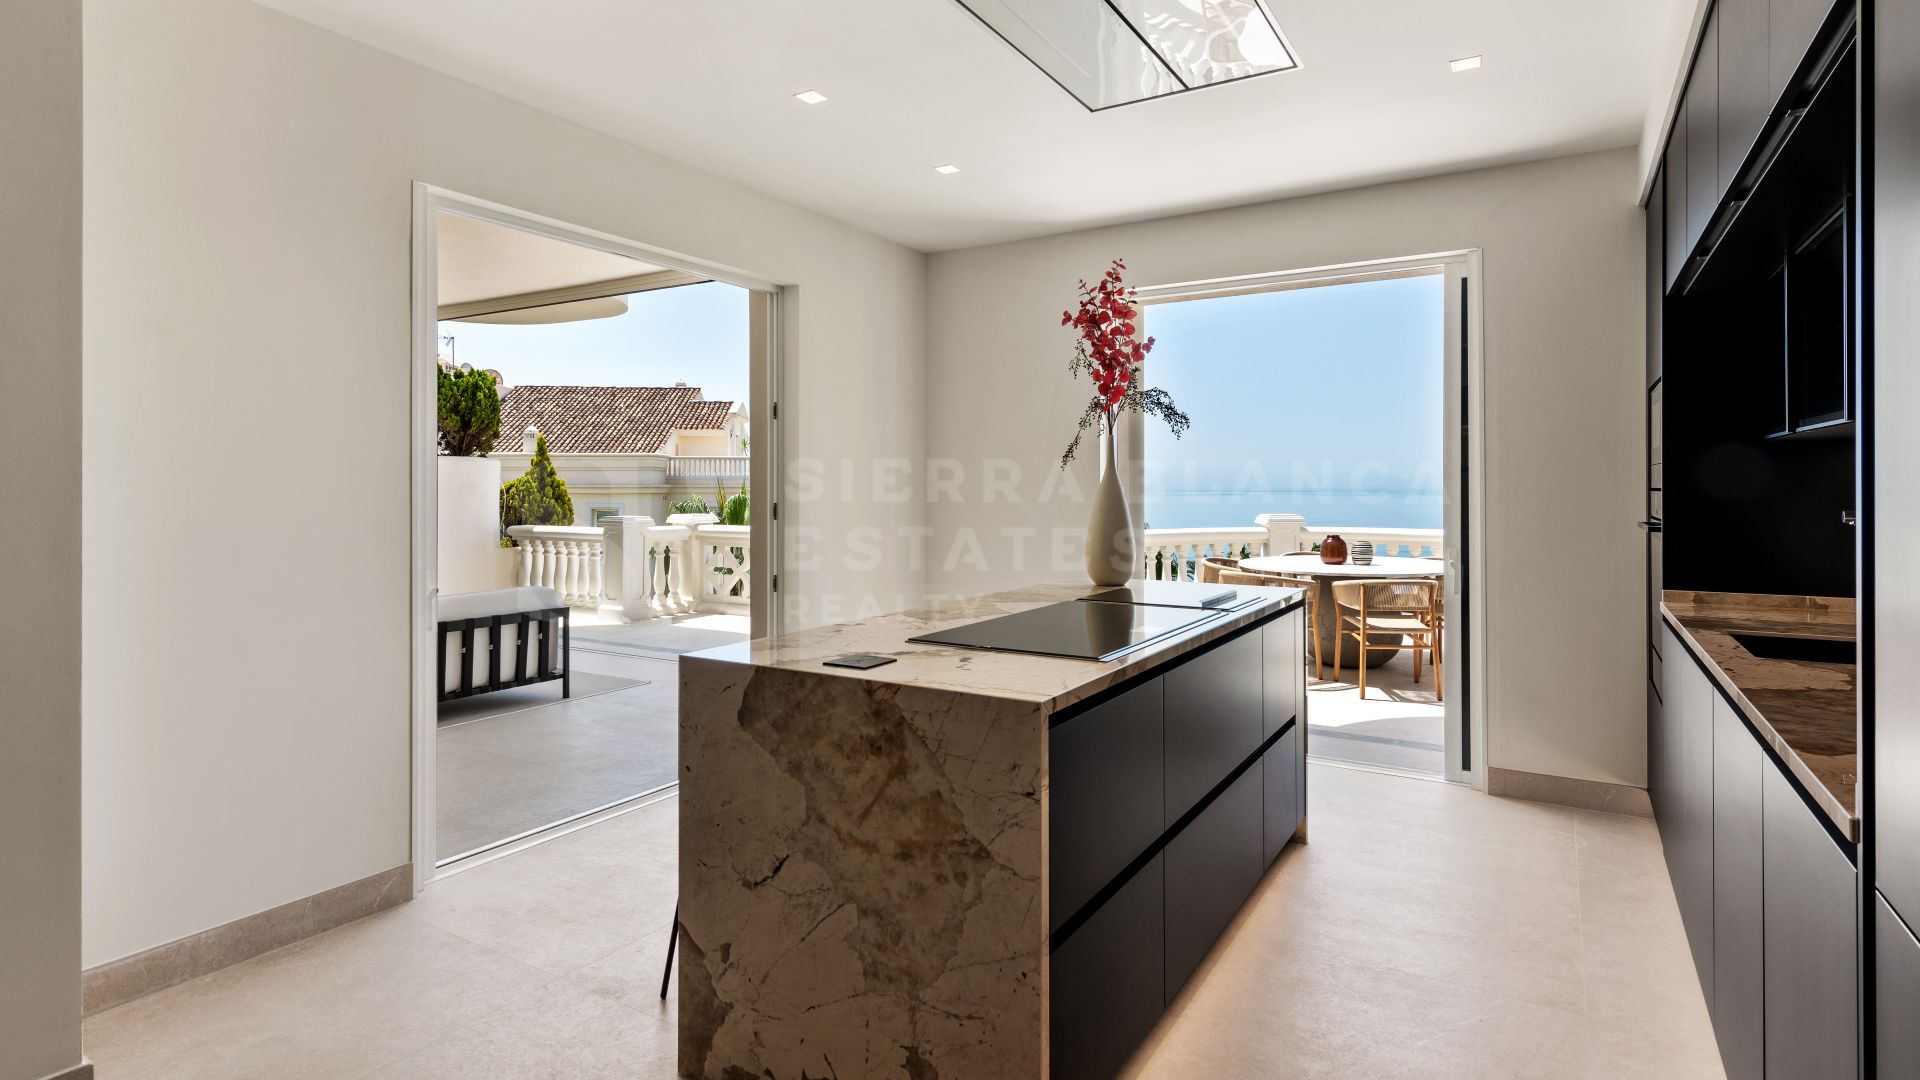 BEACH FRONT FULLY RENOVATED TO THE HIGHEST STANDARD DUPLEX PENTHOUSE